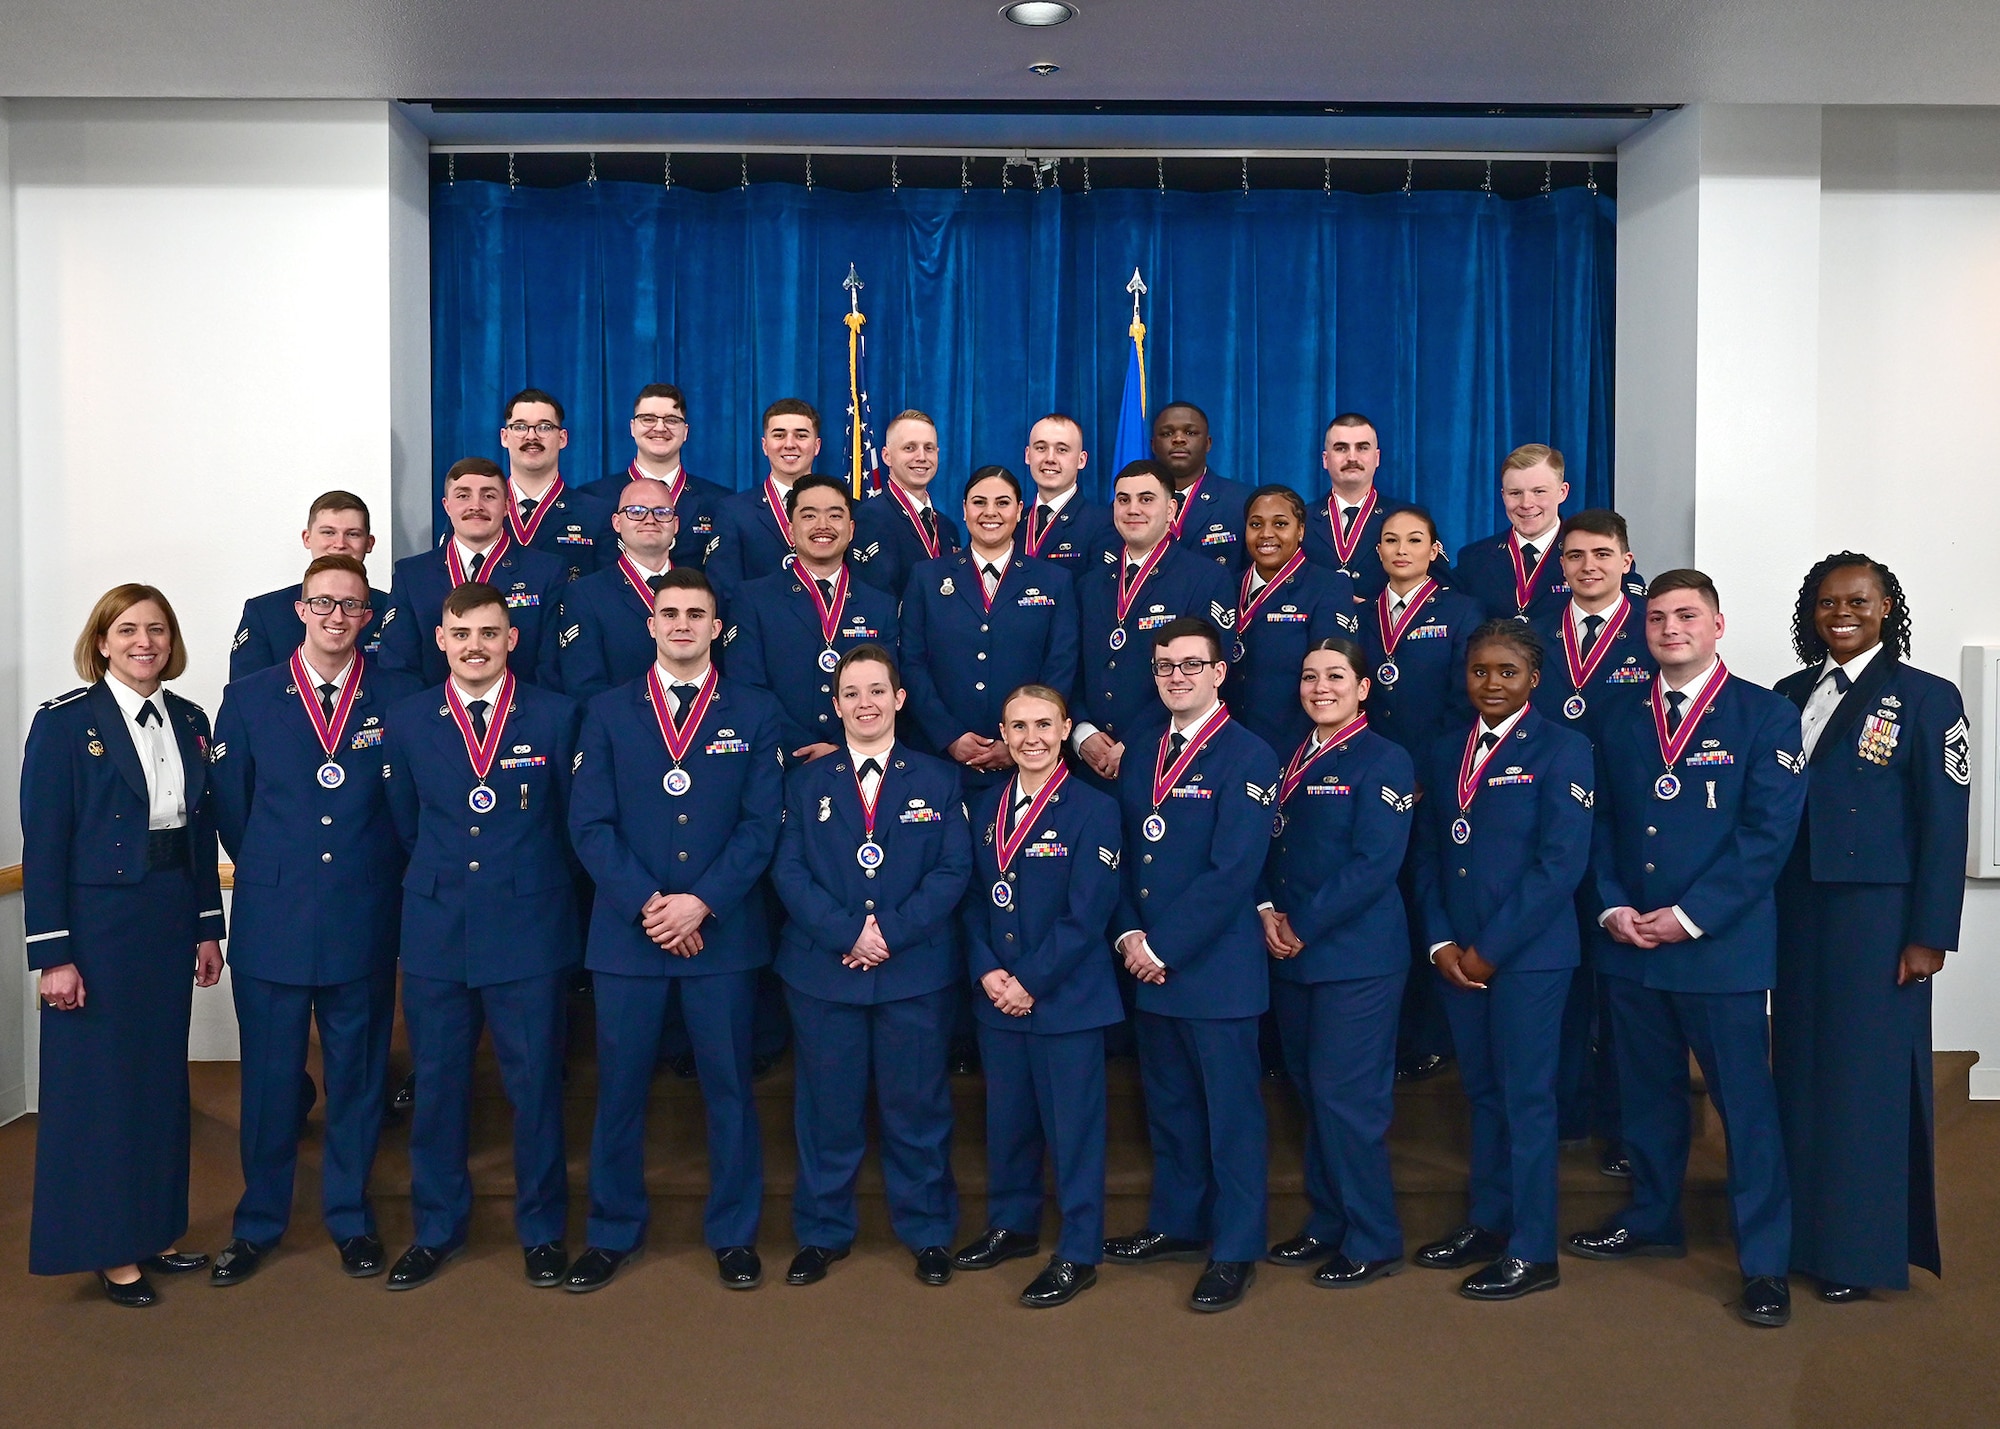 posed group photo of ALS graduates in their mess dress blue uniforms.